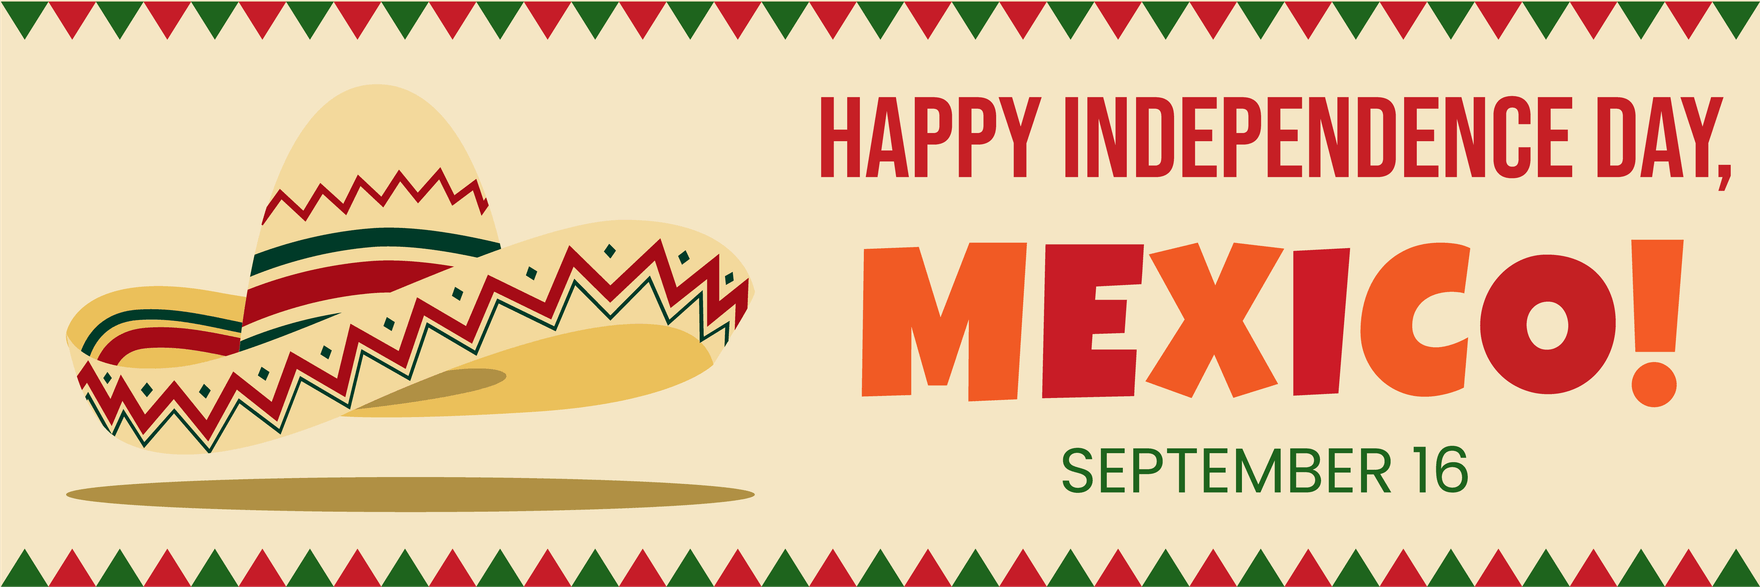 Mexican Independence Day Twitter Banner